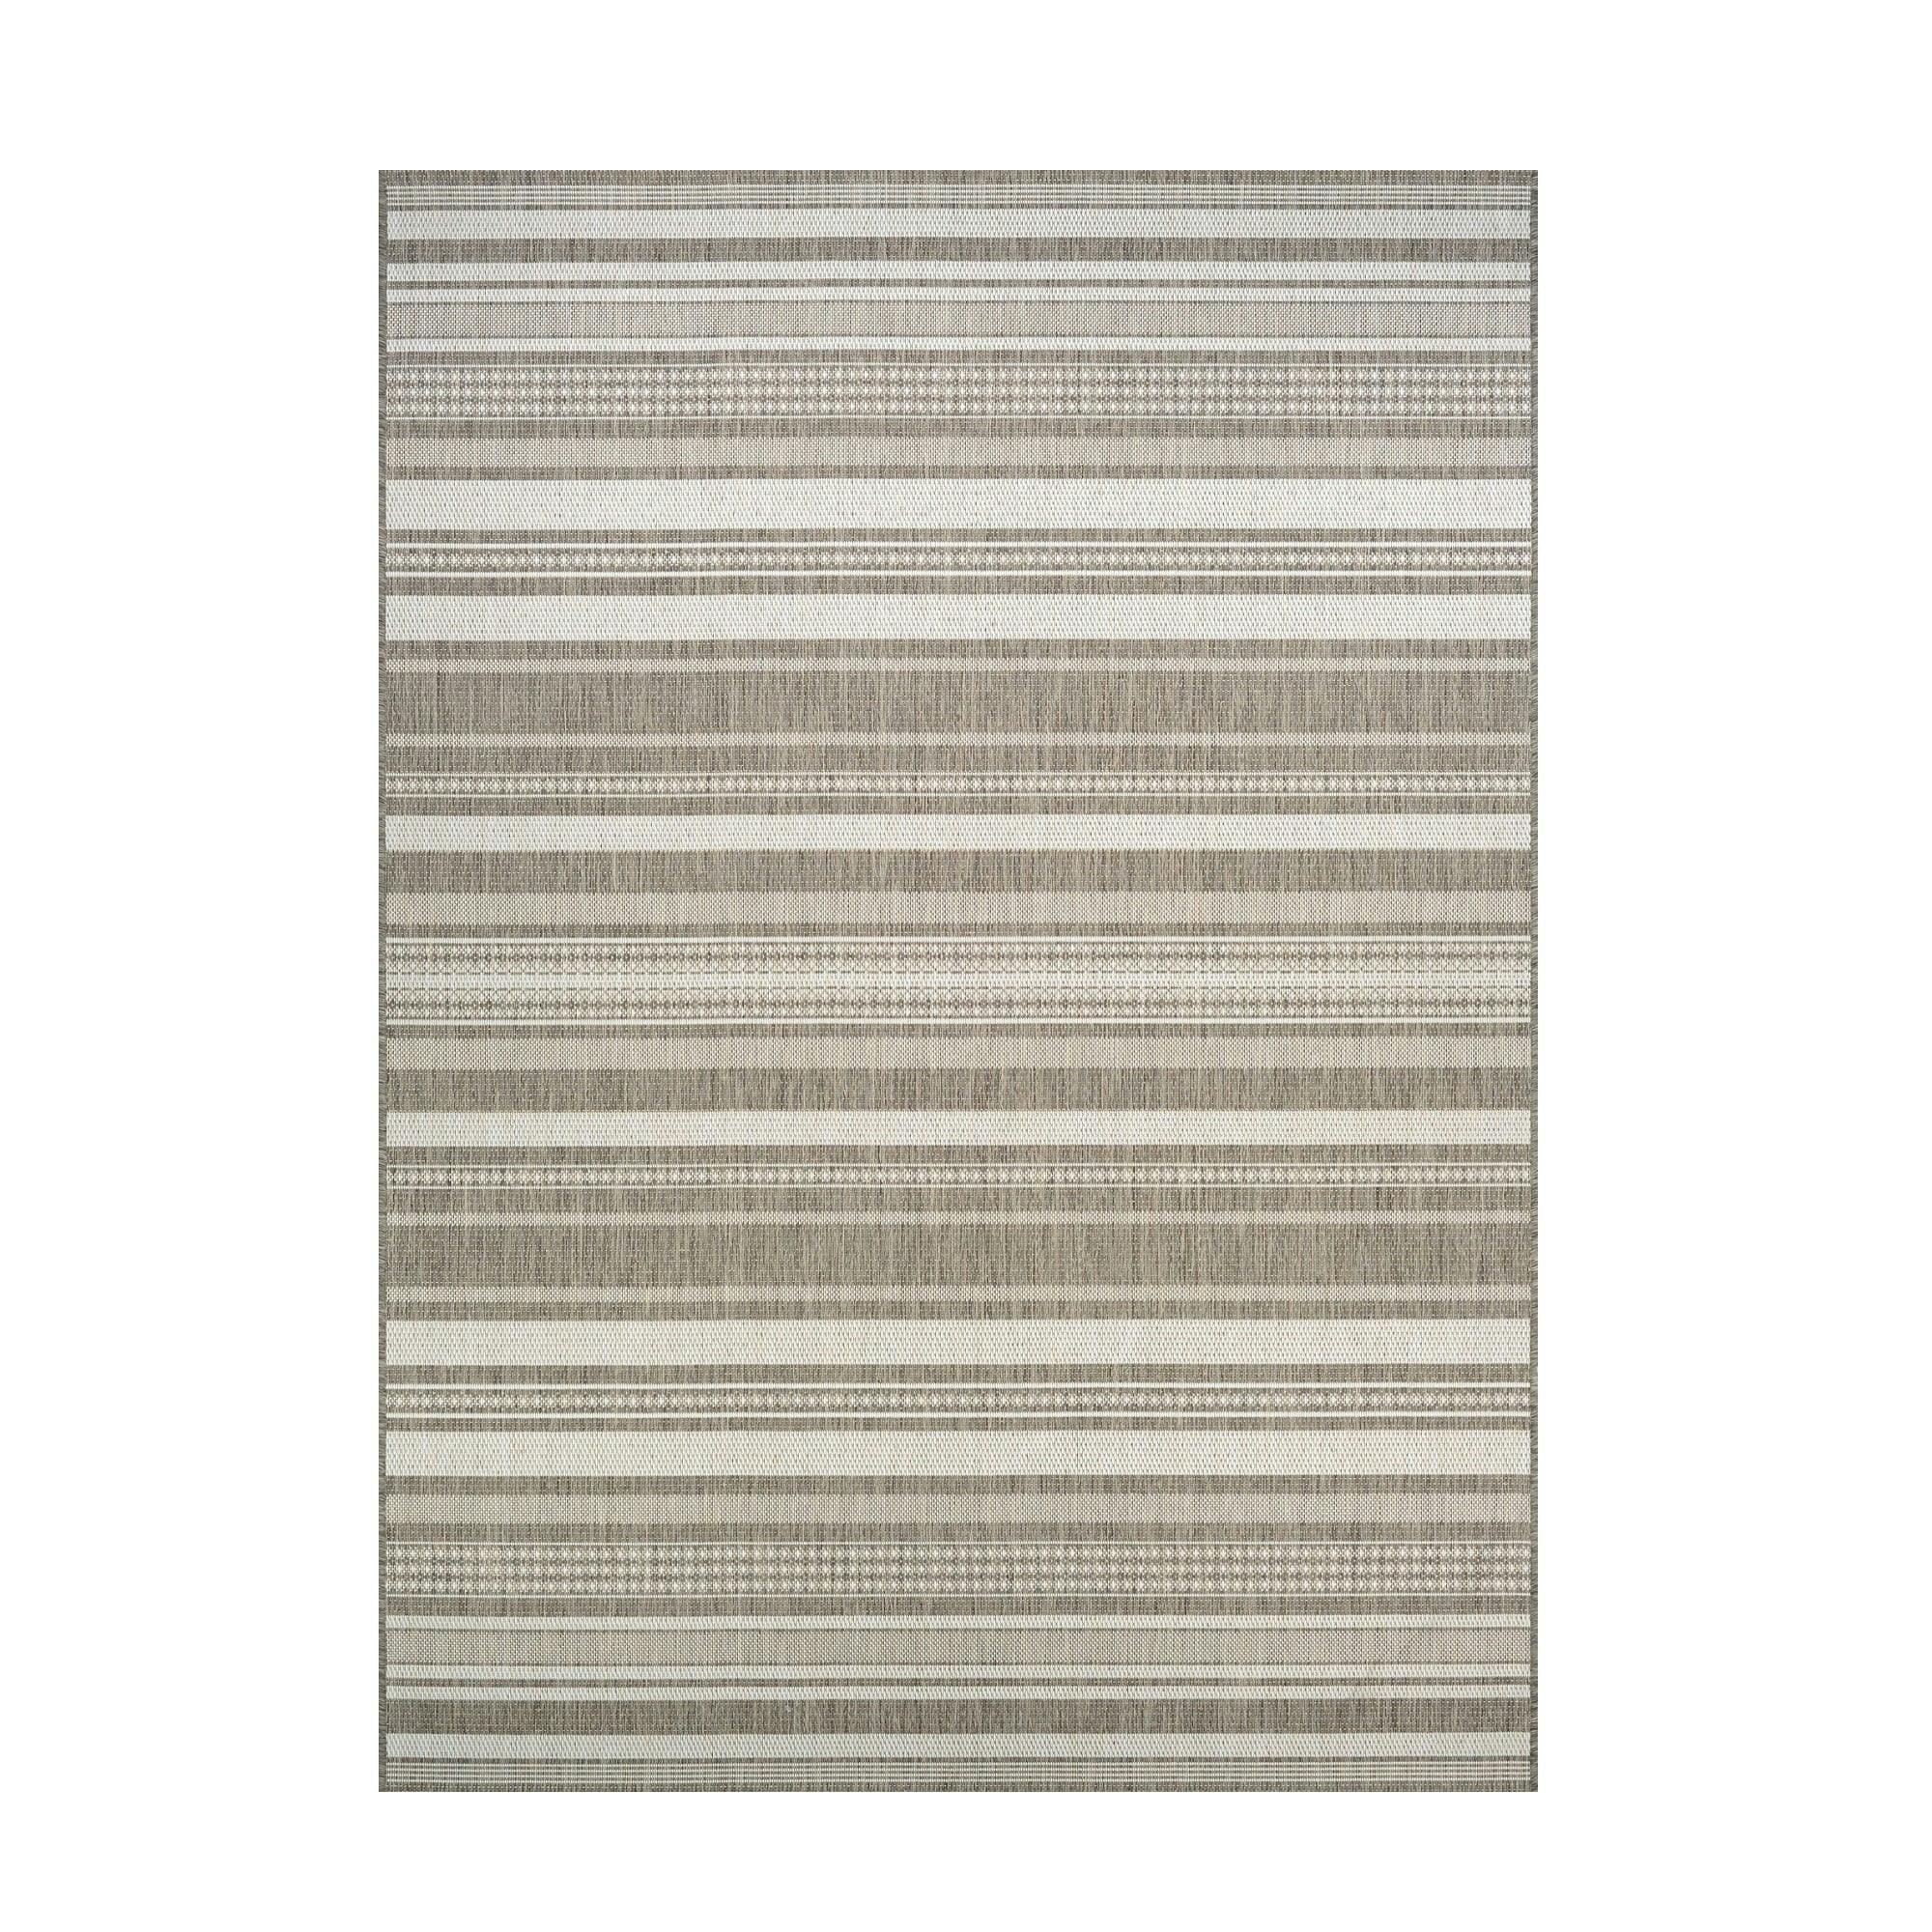 Champagne-Taupe Synthetic Rectangular Area Rug, 9' x 13'